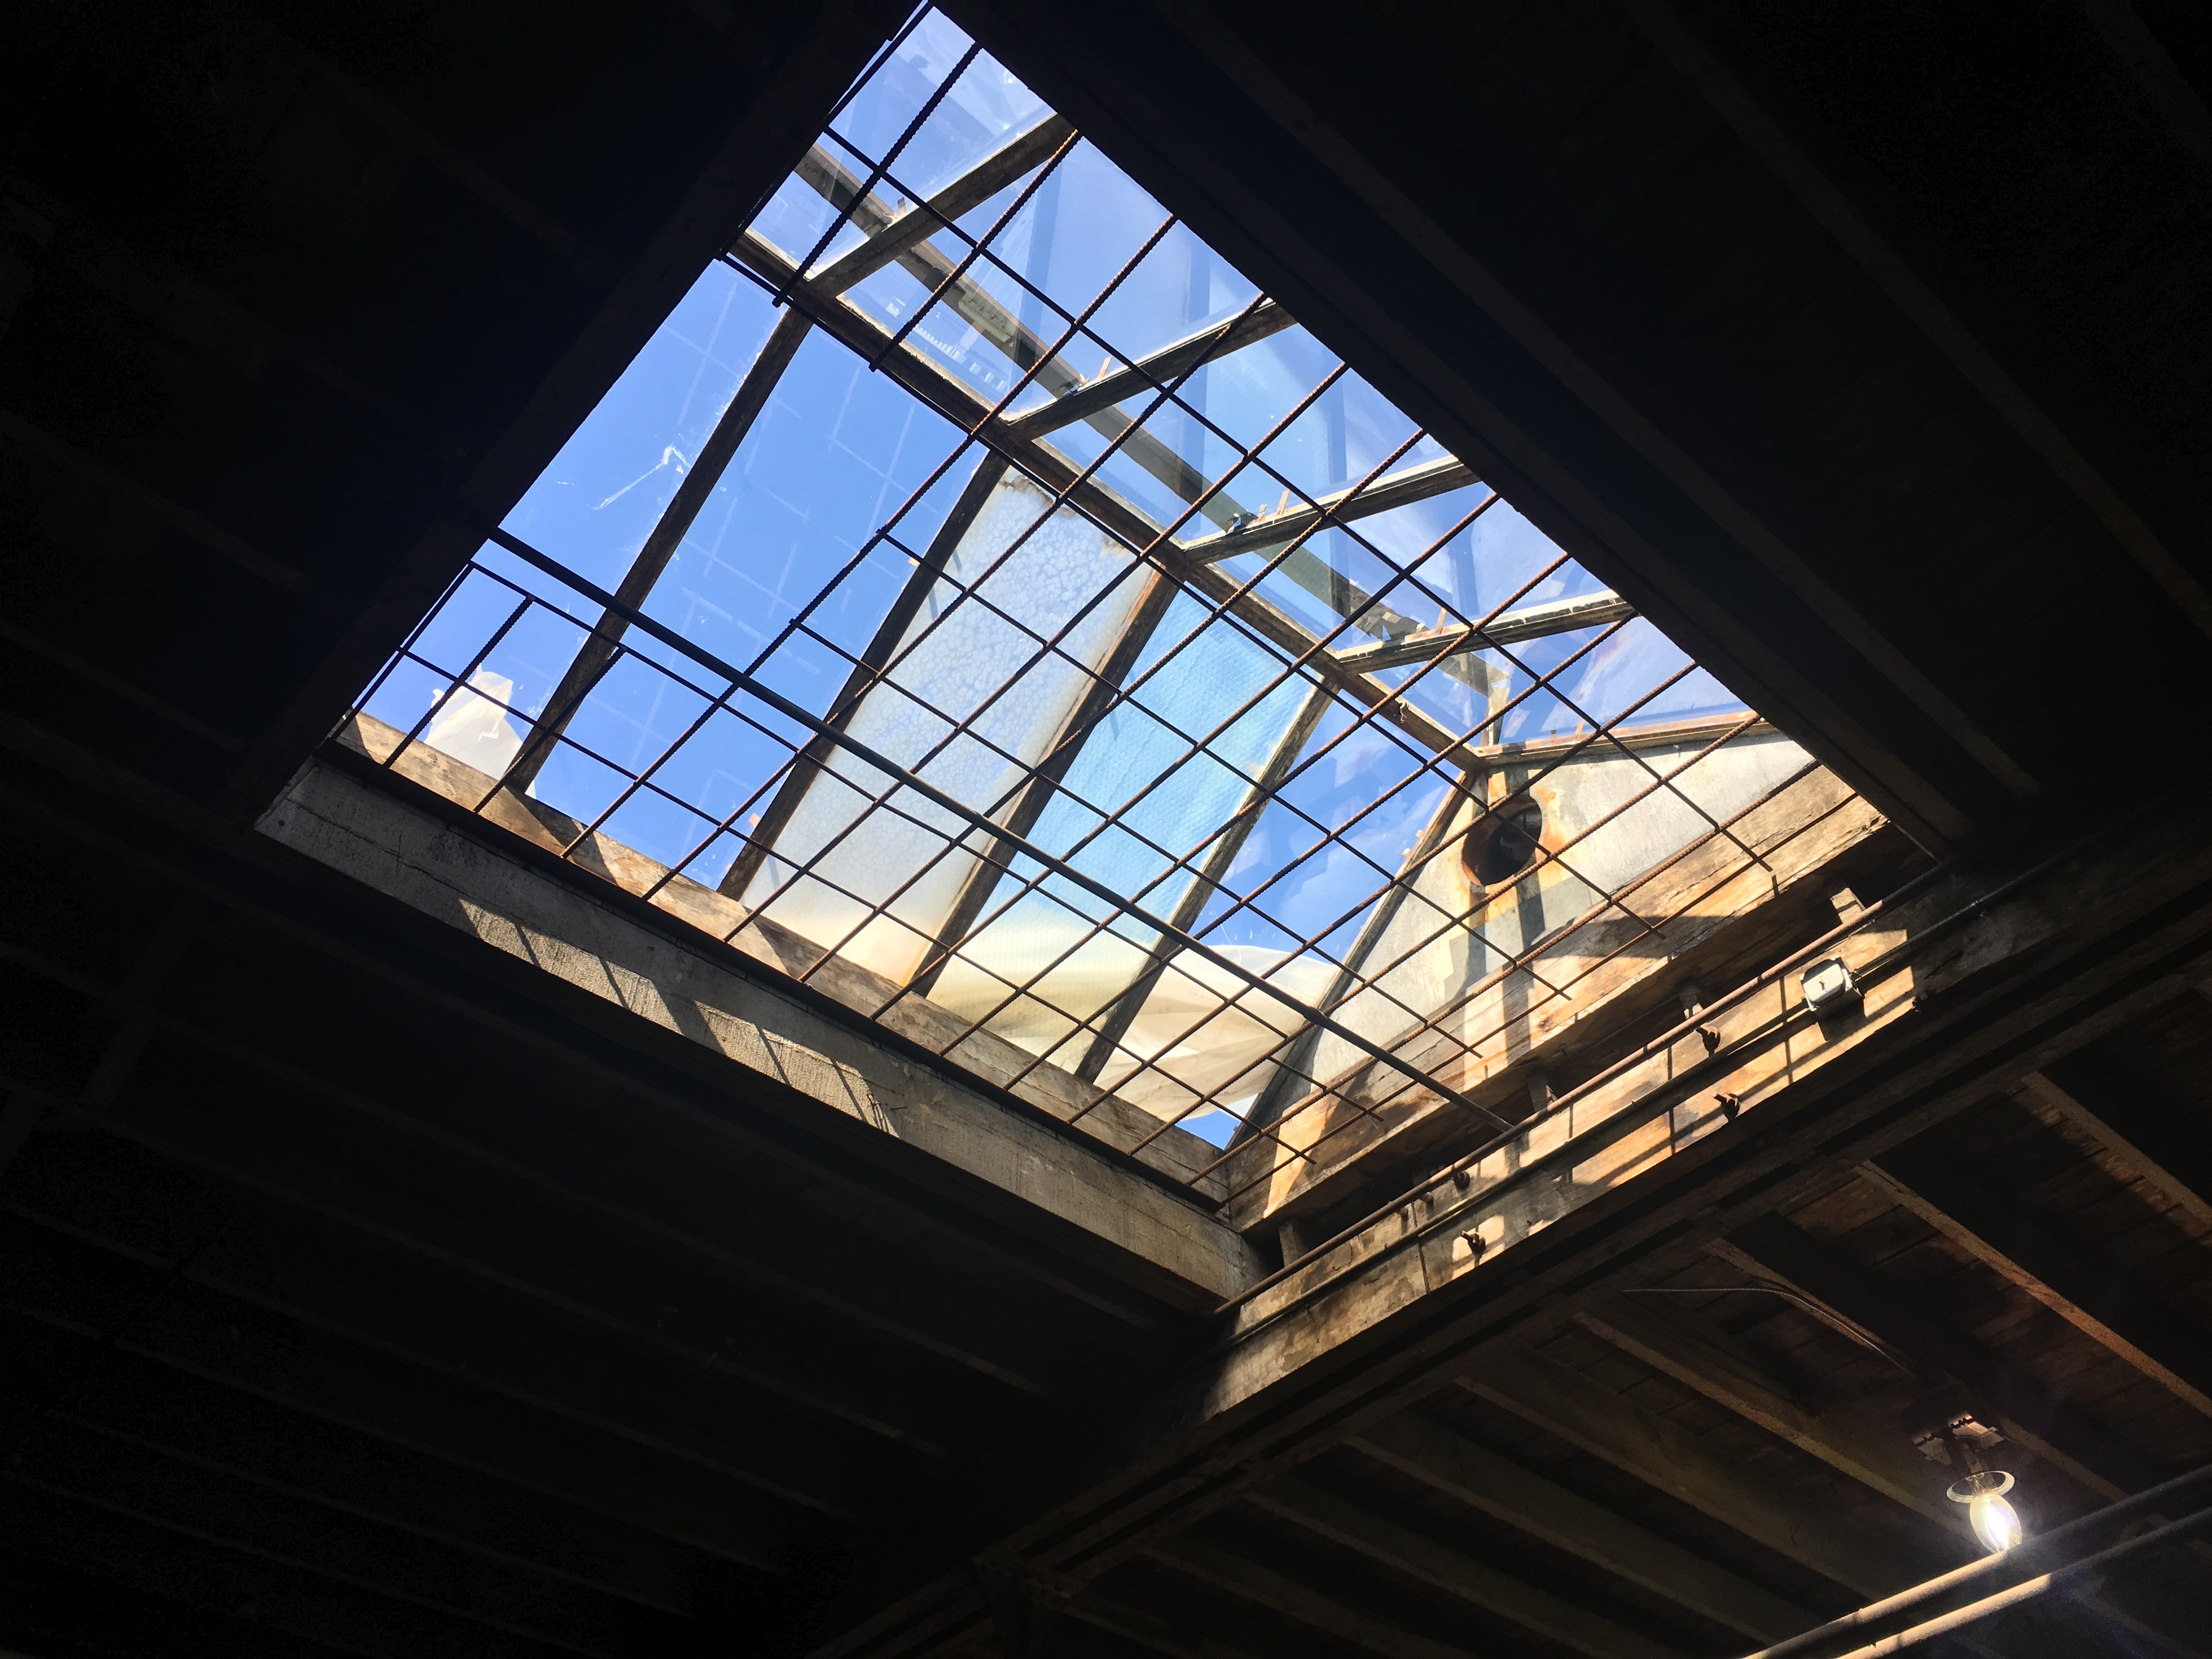 A skylight in the roof of Wonder Cowork Create's building at 340 Monroe Avenue. (Eric Clausen)